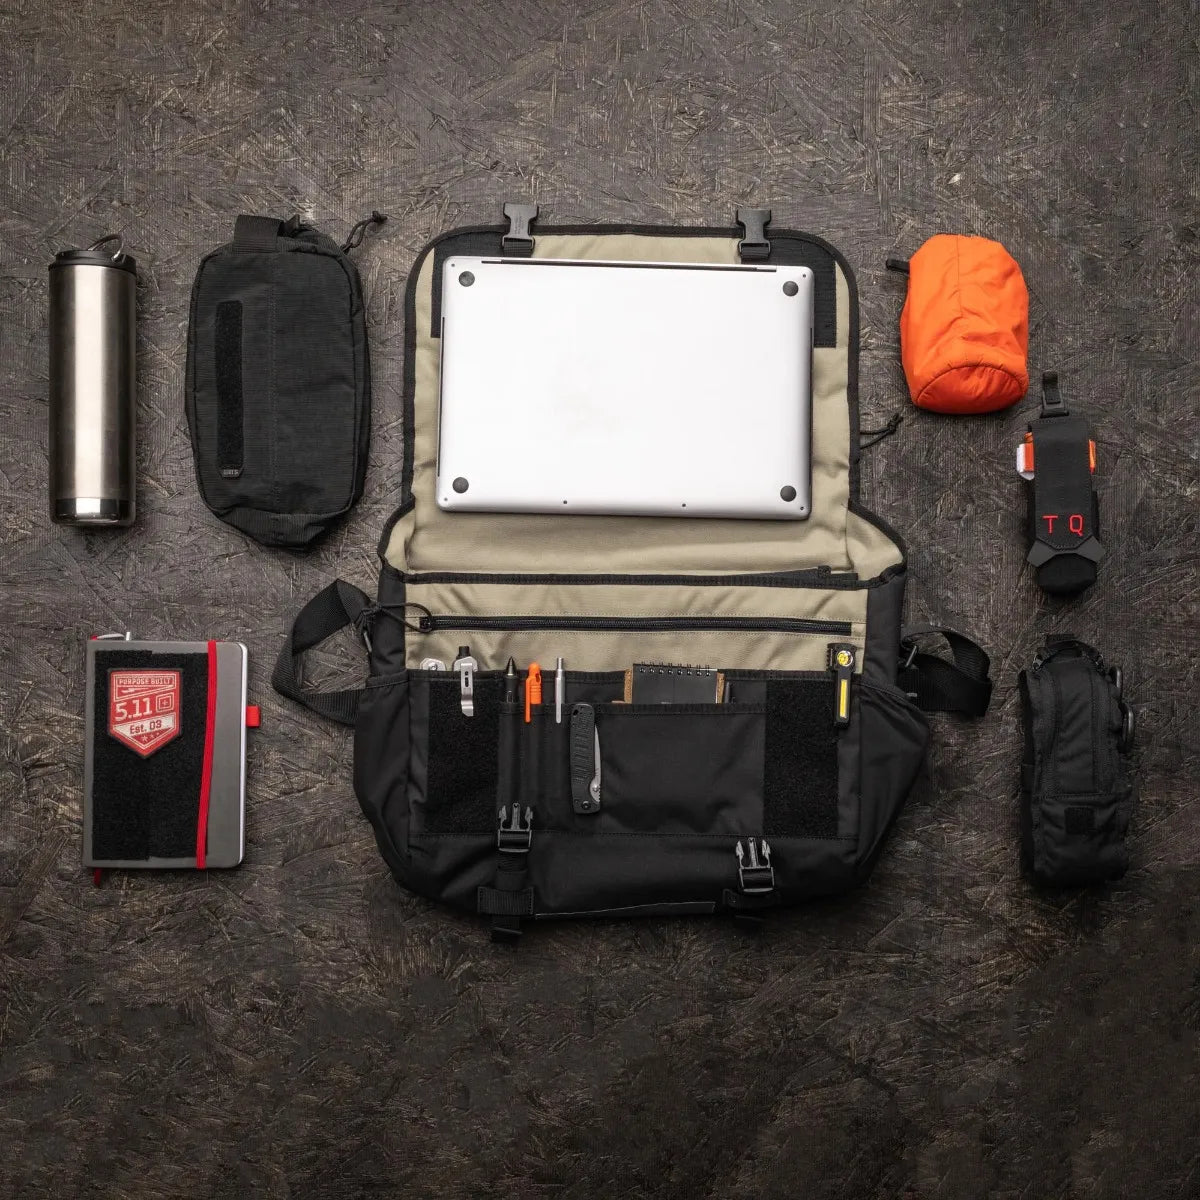 5.11 Tactical | Overwatch Messenger 18L Rugged Tactical Bag